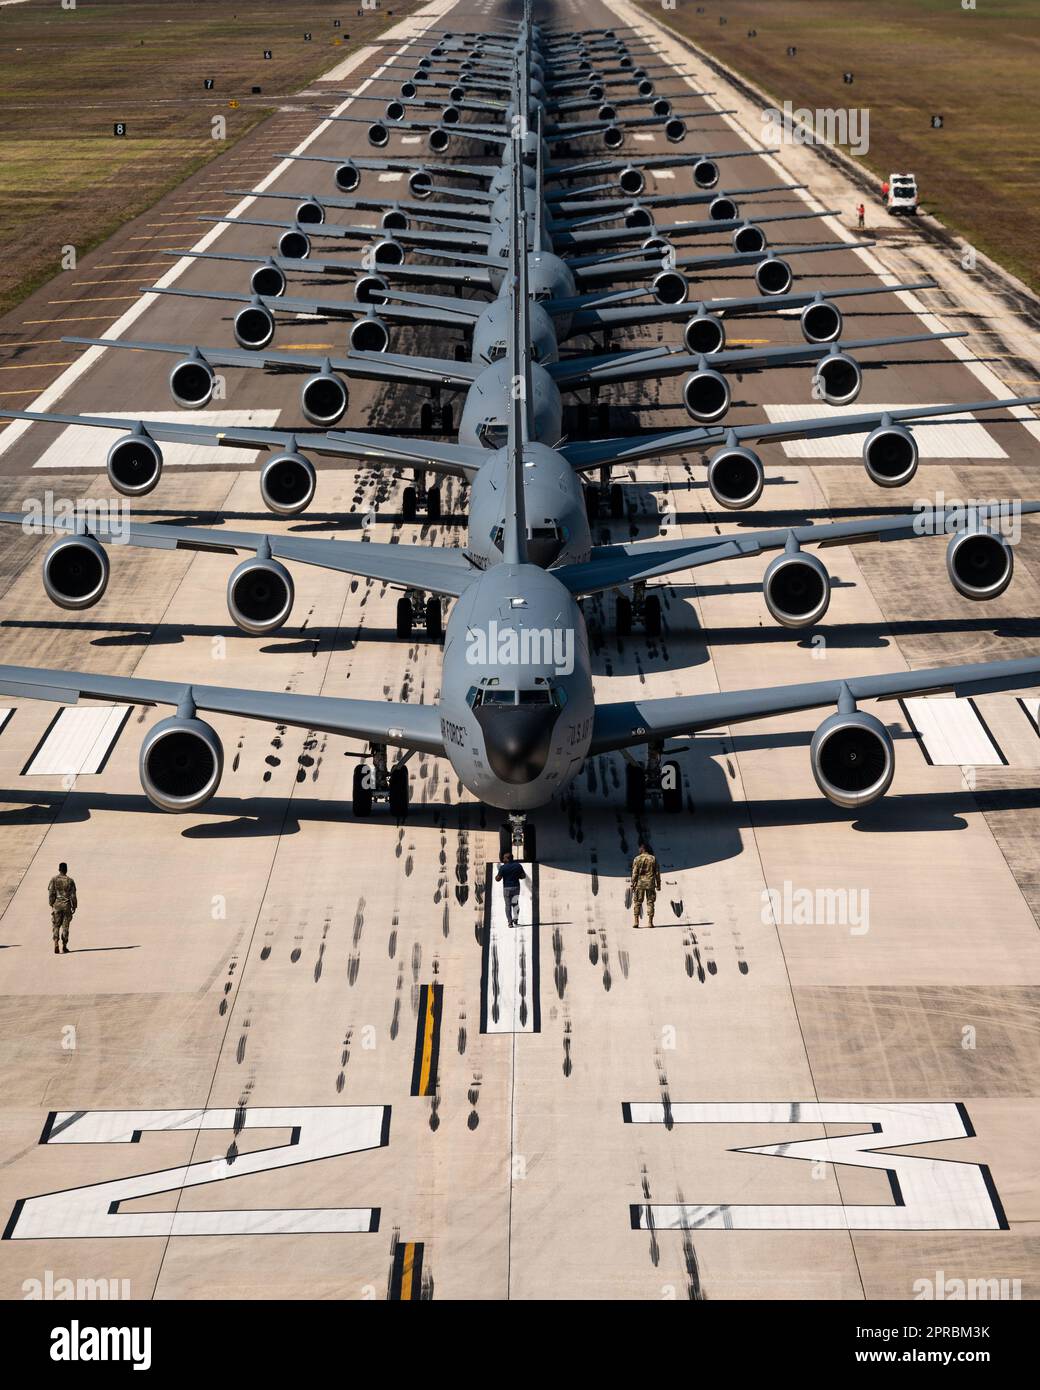 U.S. Air Force KC-135 Stratotanker aircraft assigned to the 6th and 927th Air Refueling Wings participate during Operation Violent Storm April 26, 2023, at MacDill Air Force Base, Florida. Violent Storm proved that MacDill AFB has the capability to project overwhelming air power in a short timeframe. (U.S. Air Force photo by Tech. Sgt. Alexander) Stock Photo